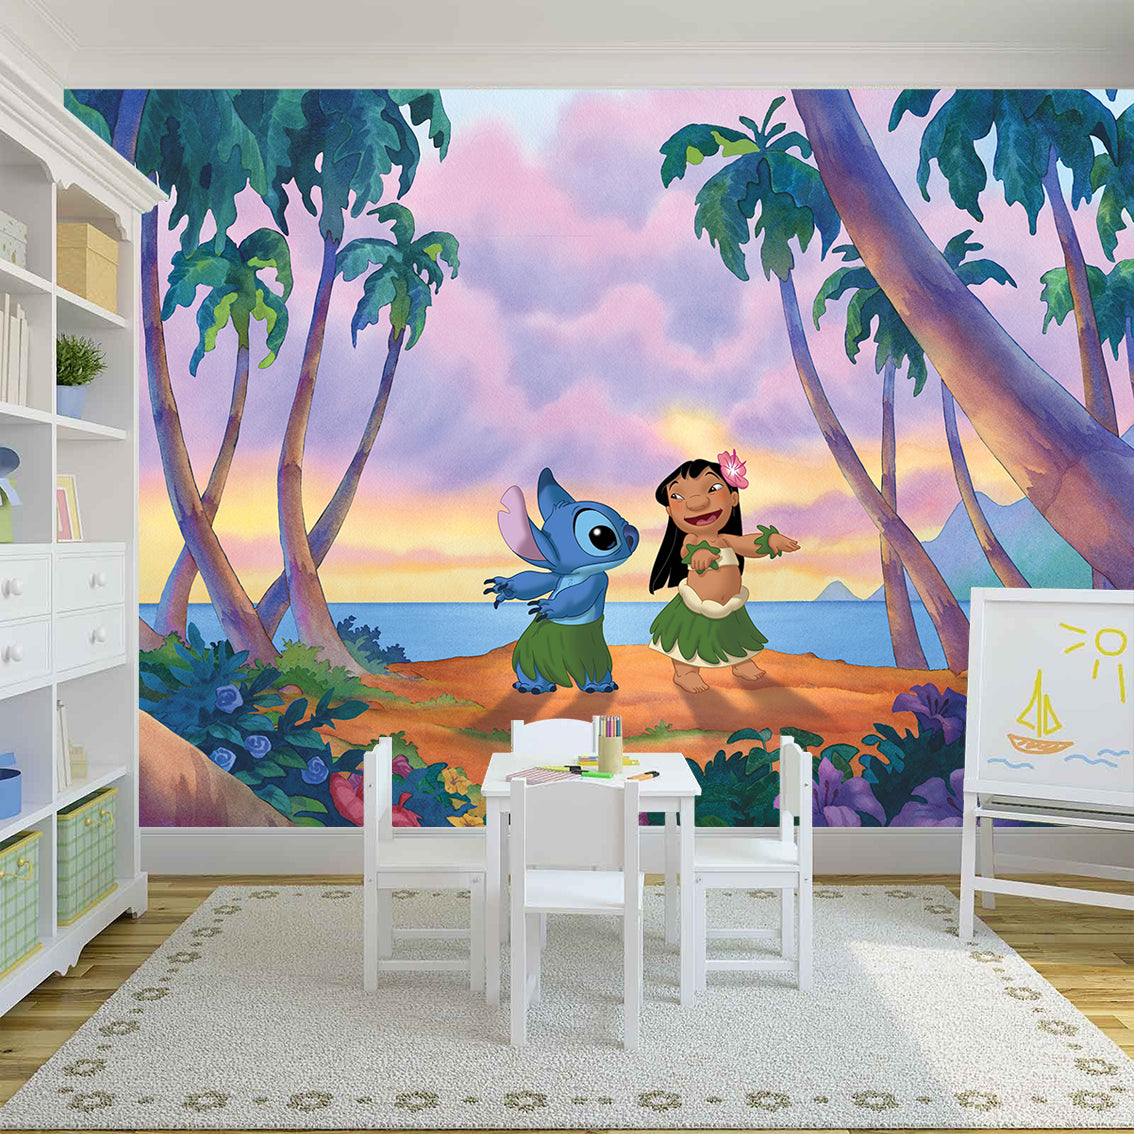  Stitch Wall Stickers Cartoon Wall Decals DIY Peel and